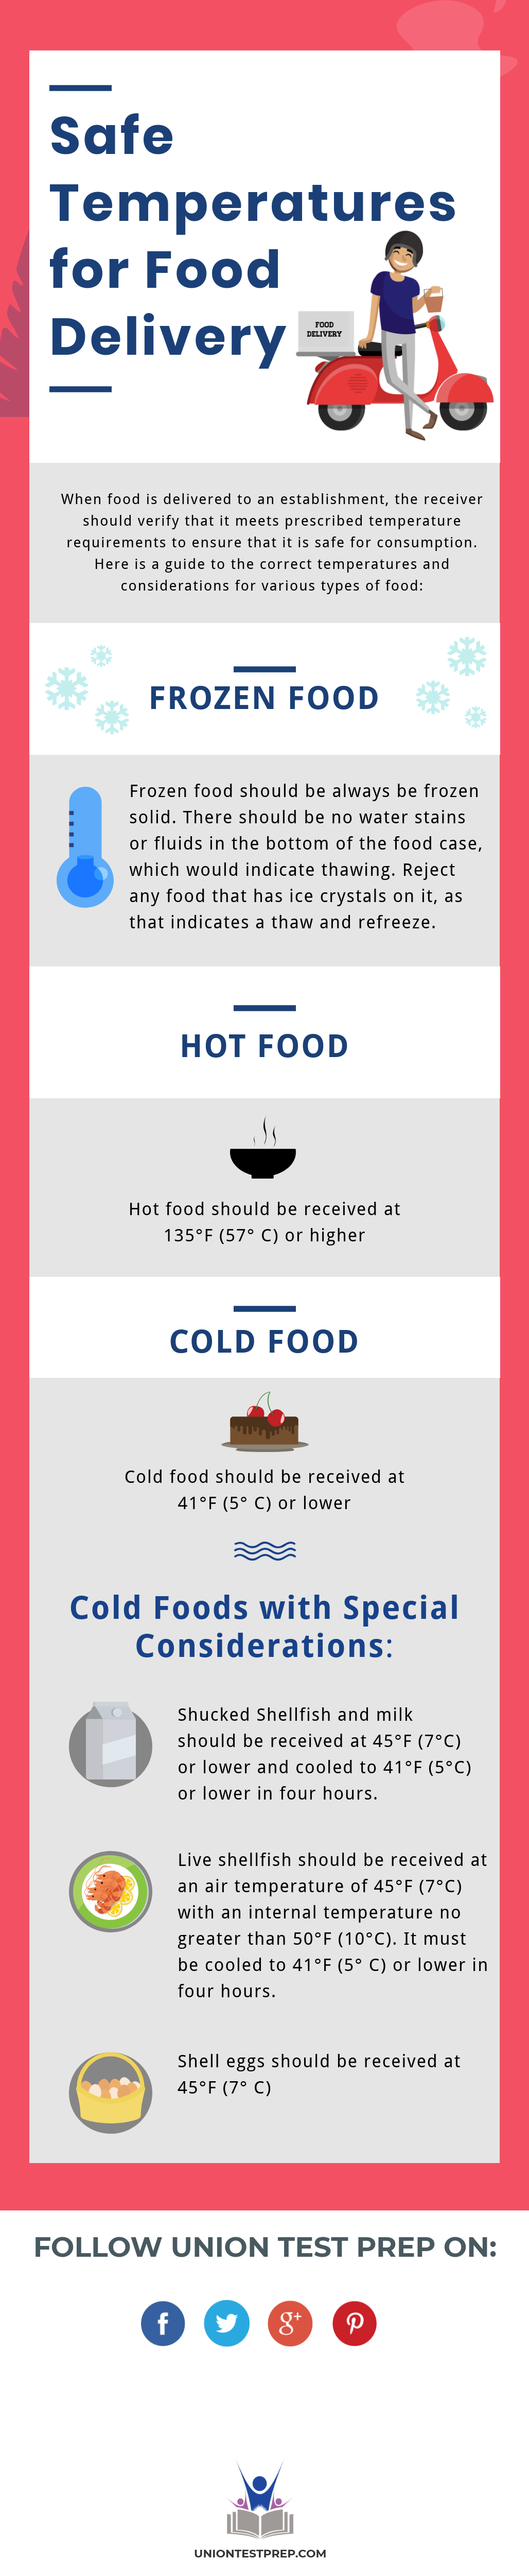 Safe Temperatures for Food Delivery